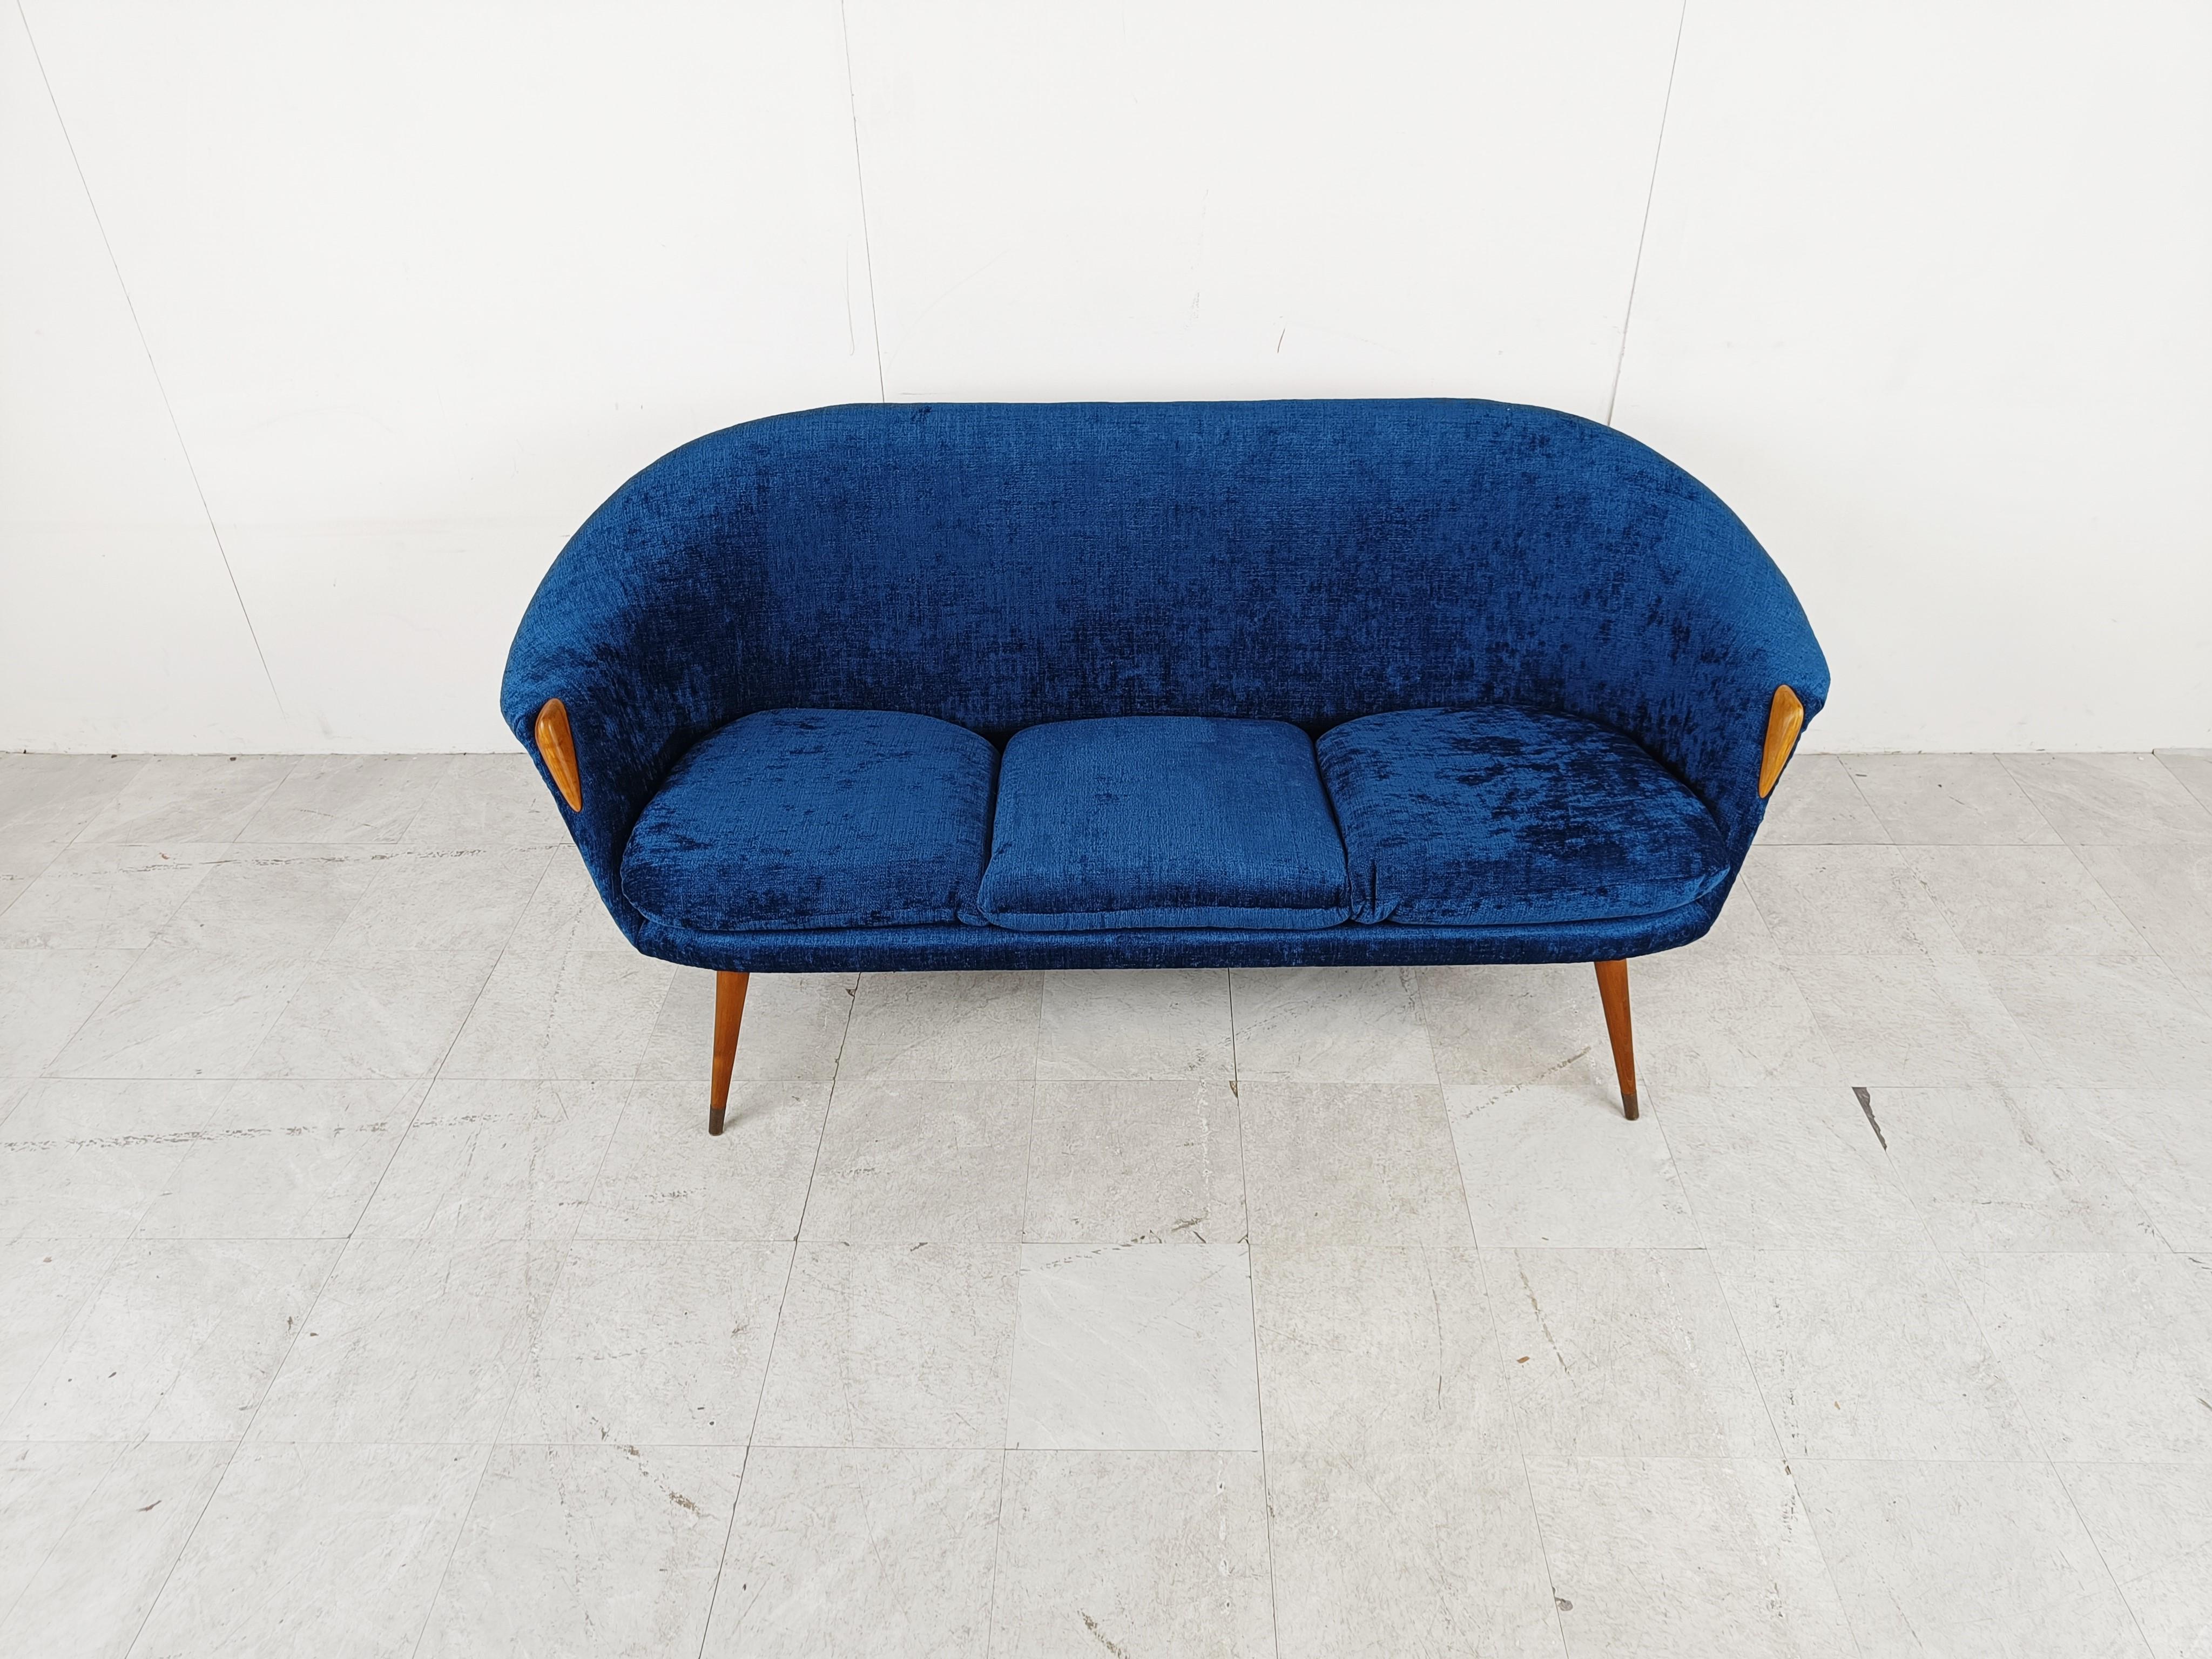 Beautiful mid-century sofa attributed to Nanna Ditzel.
Eye catching design with finely crafted wooden legs.
The sofa has been reupholstered in blue fabric.
1950s - Denmark
Perfect condition
Dimensions
Height: 80cm/31.49